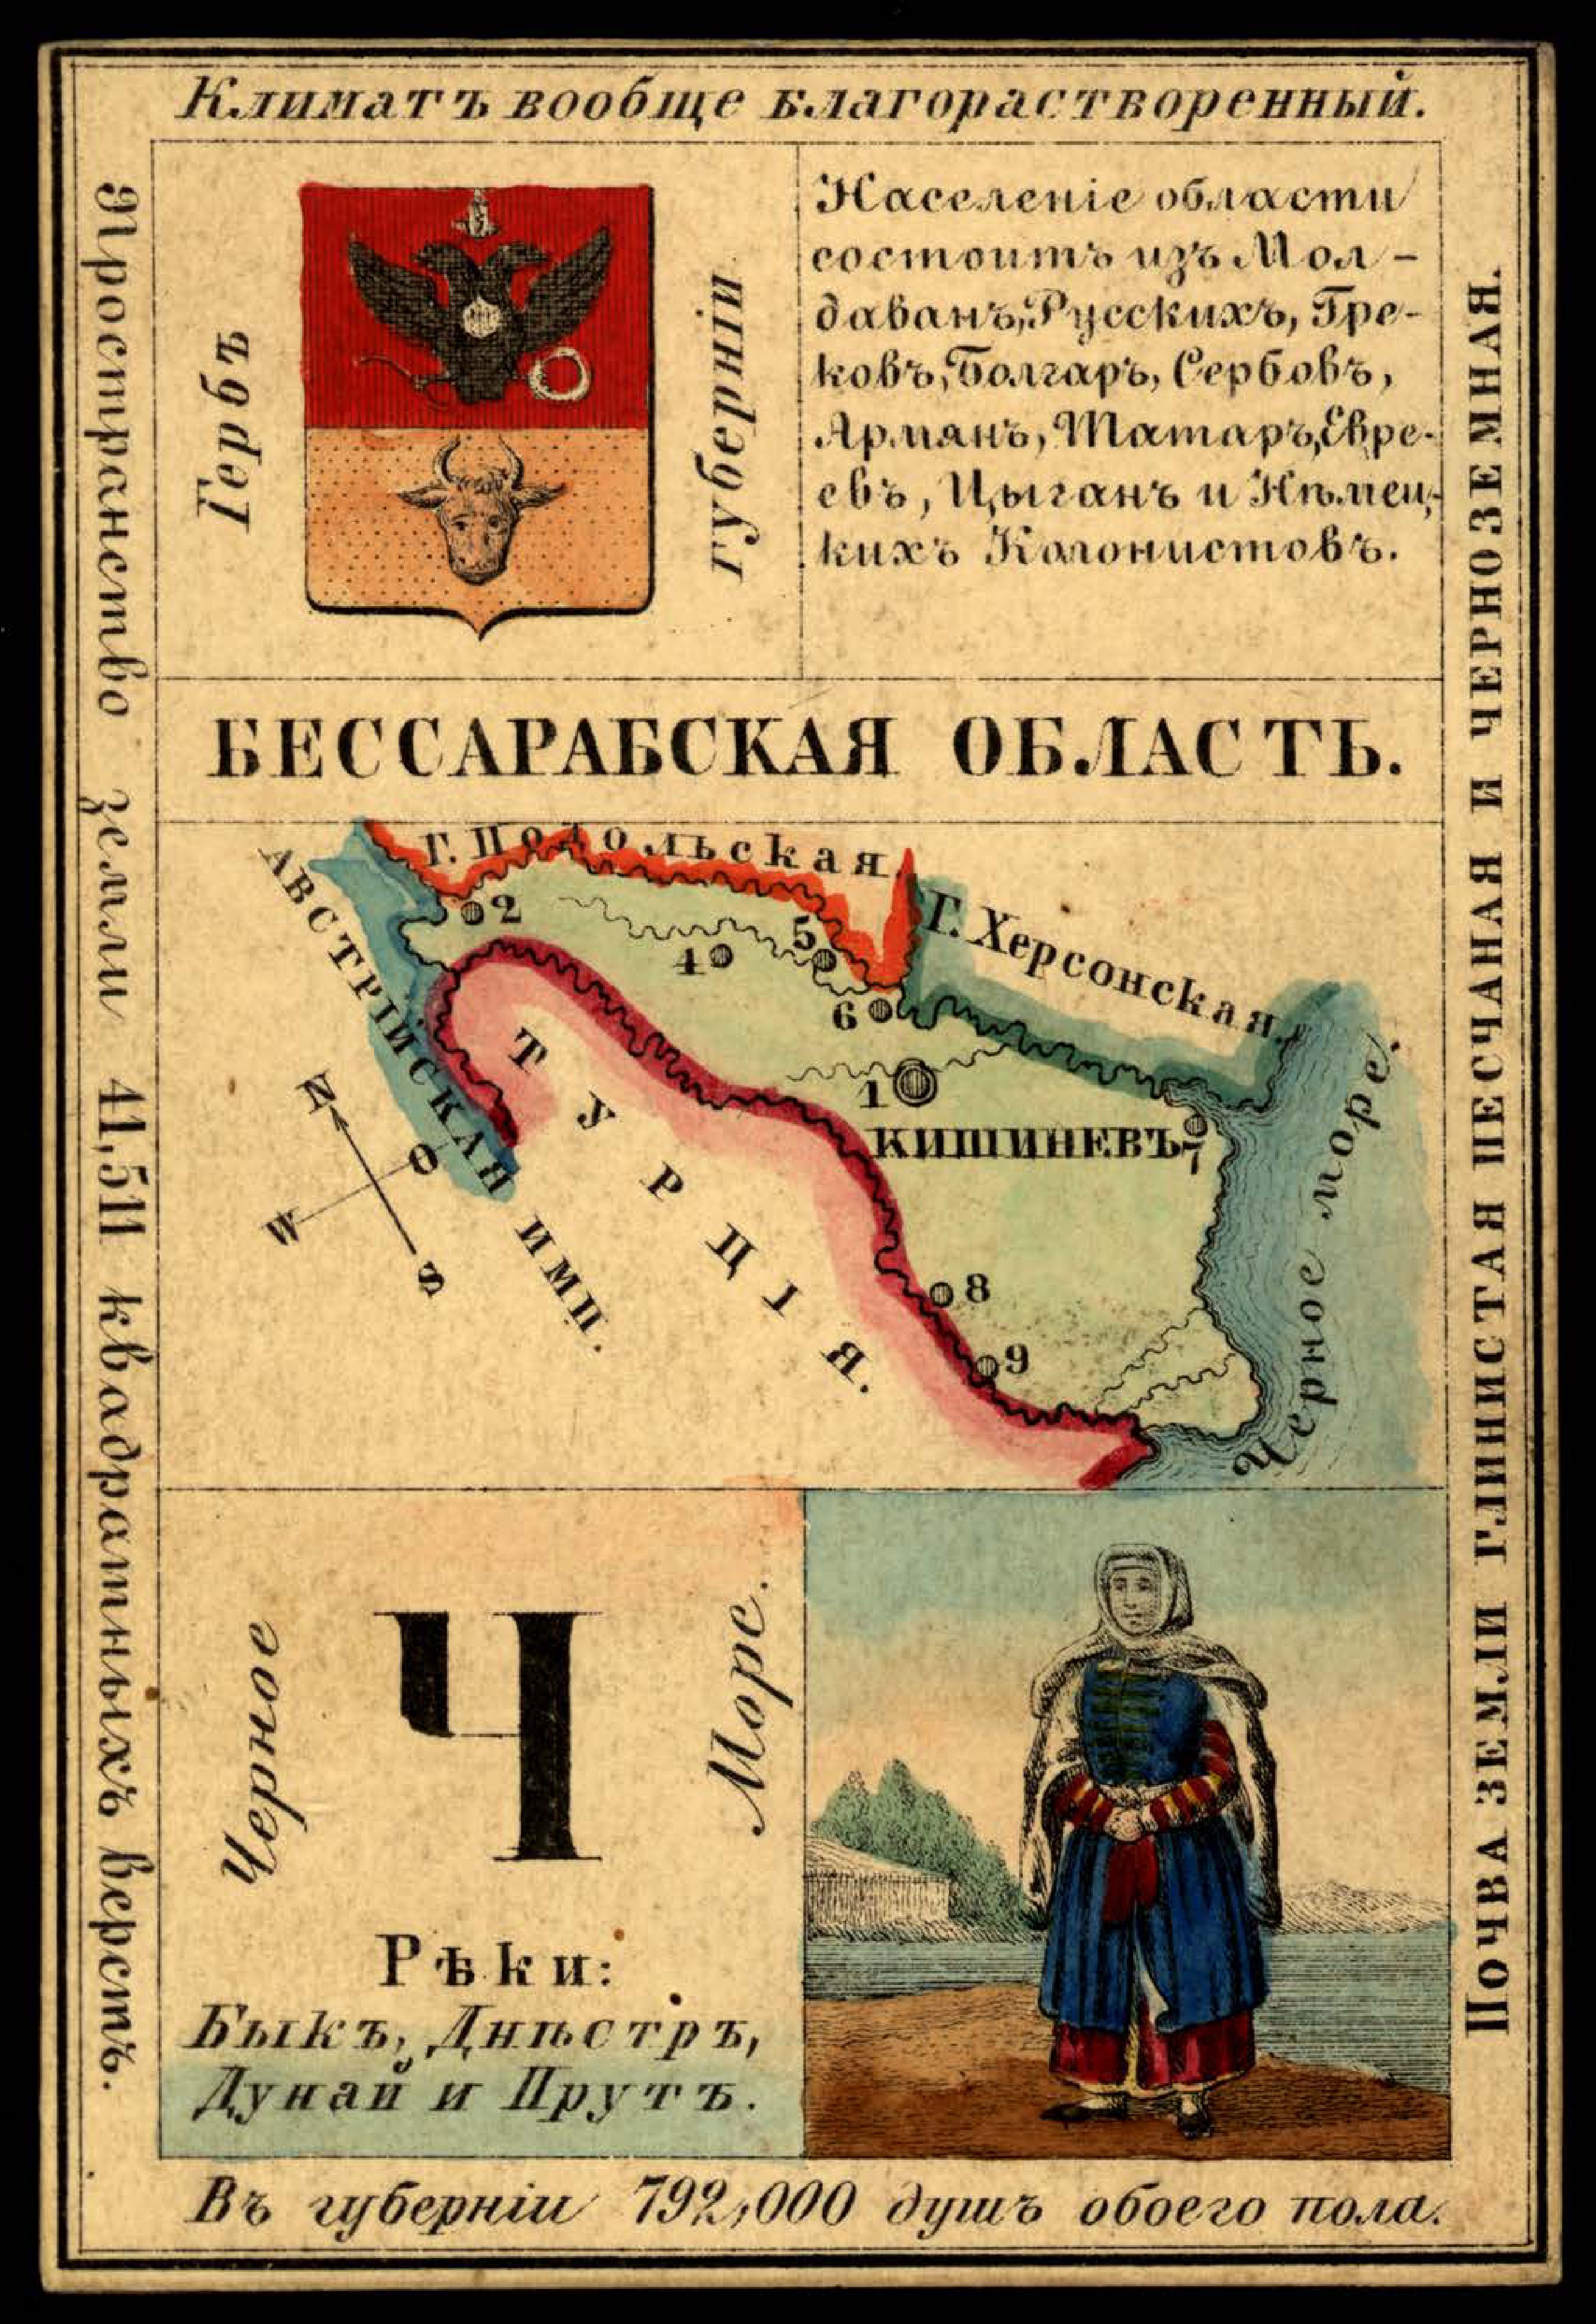 1856. Card from set of geographical cards of the Russian Empire 010